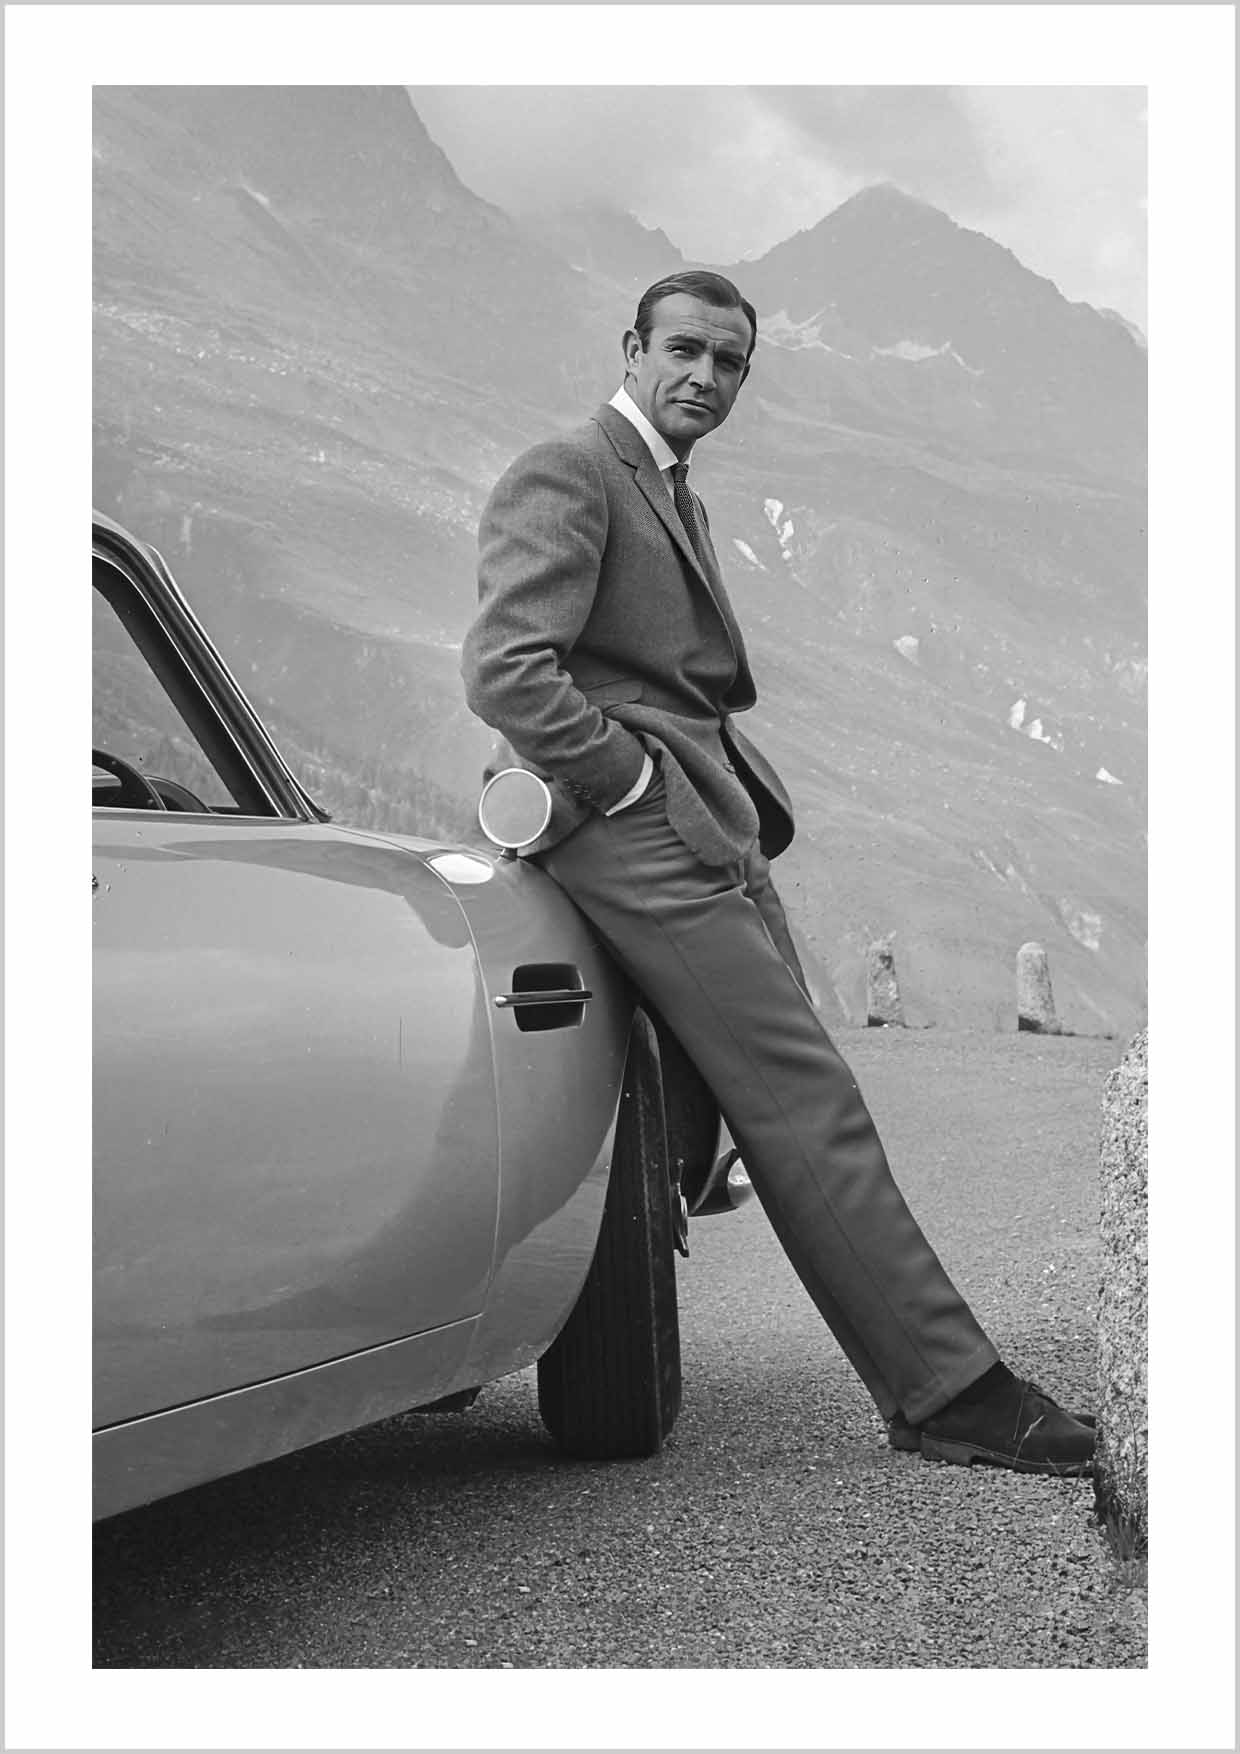 Sean Connery with Aston Martin DB5 During the Filming of 'Goldfinger'